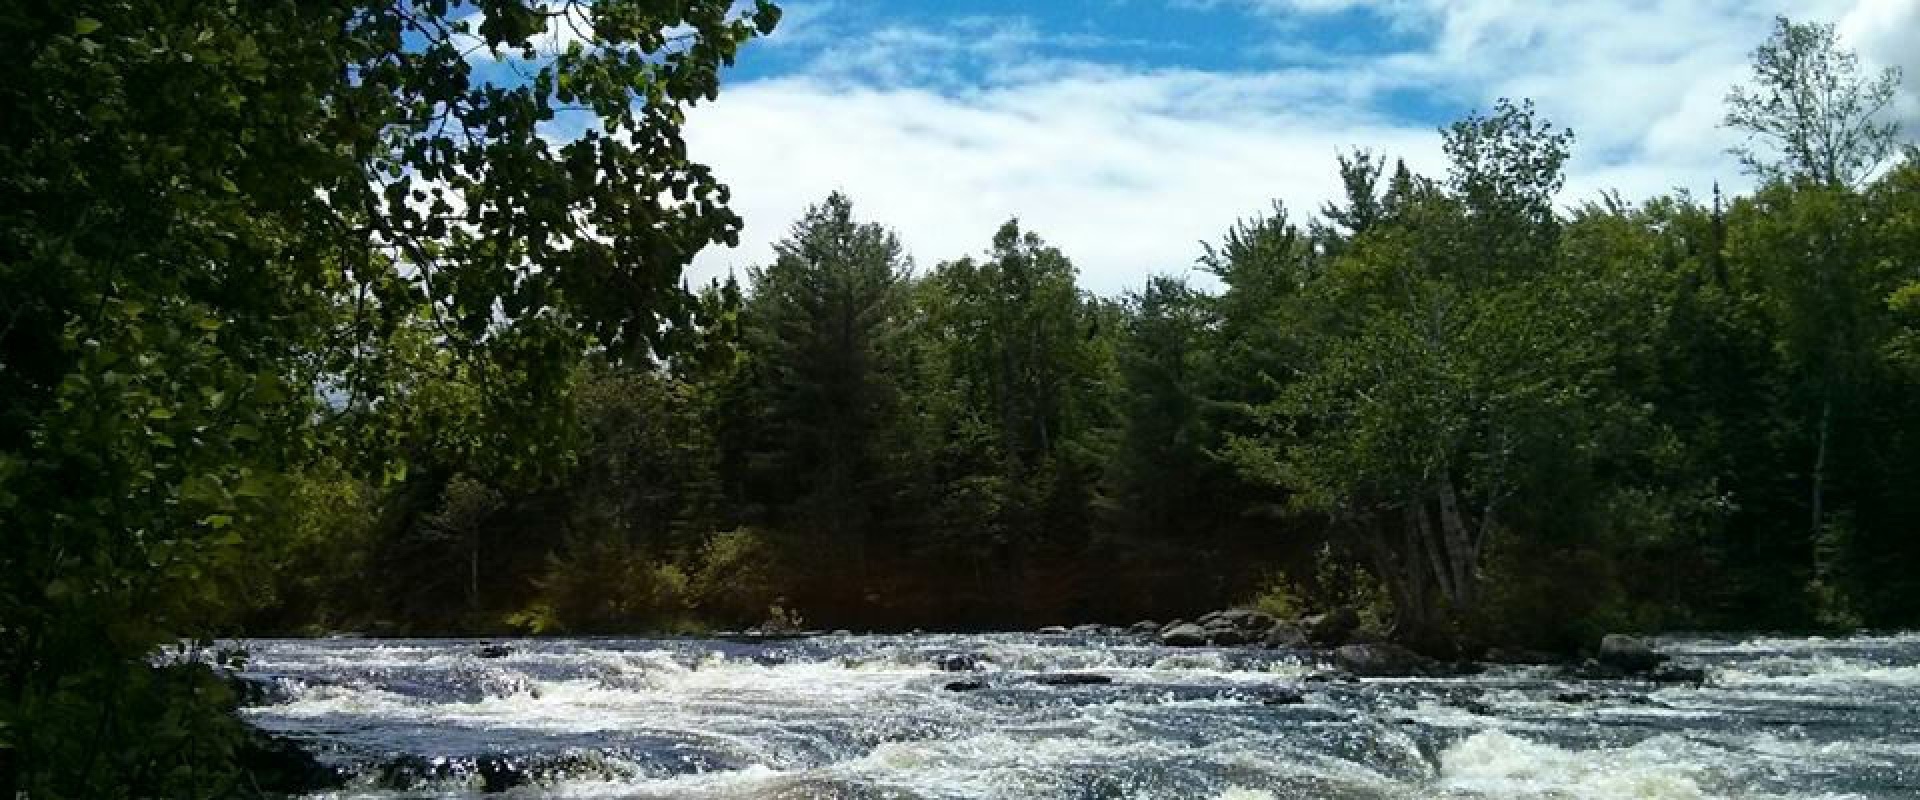 Water rushes through the Little Falls Rapids on the St. Croix River. 